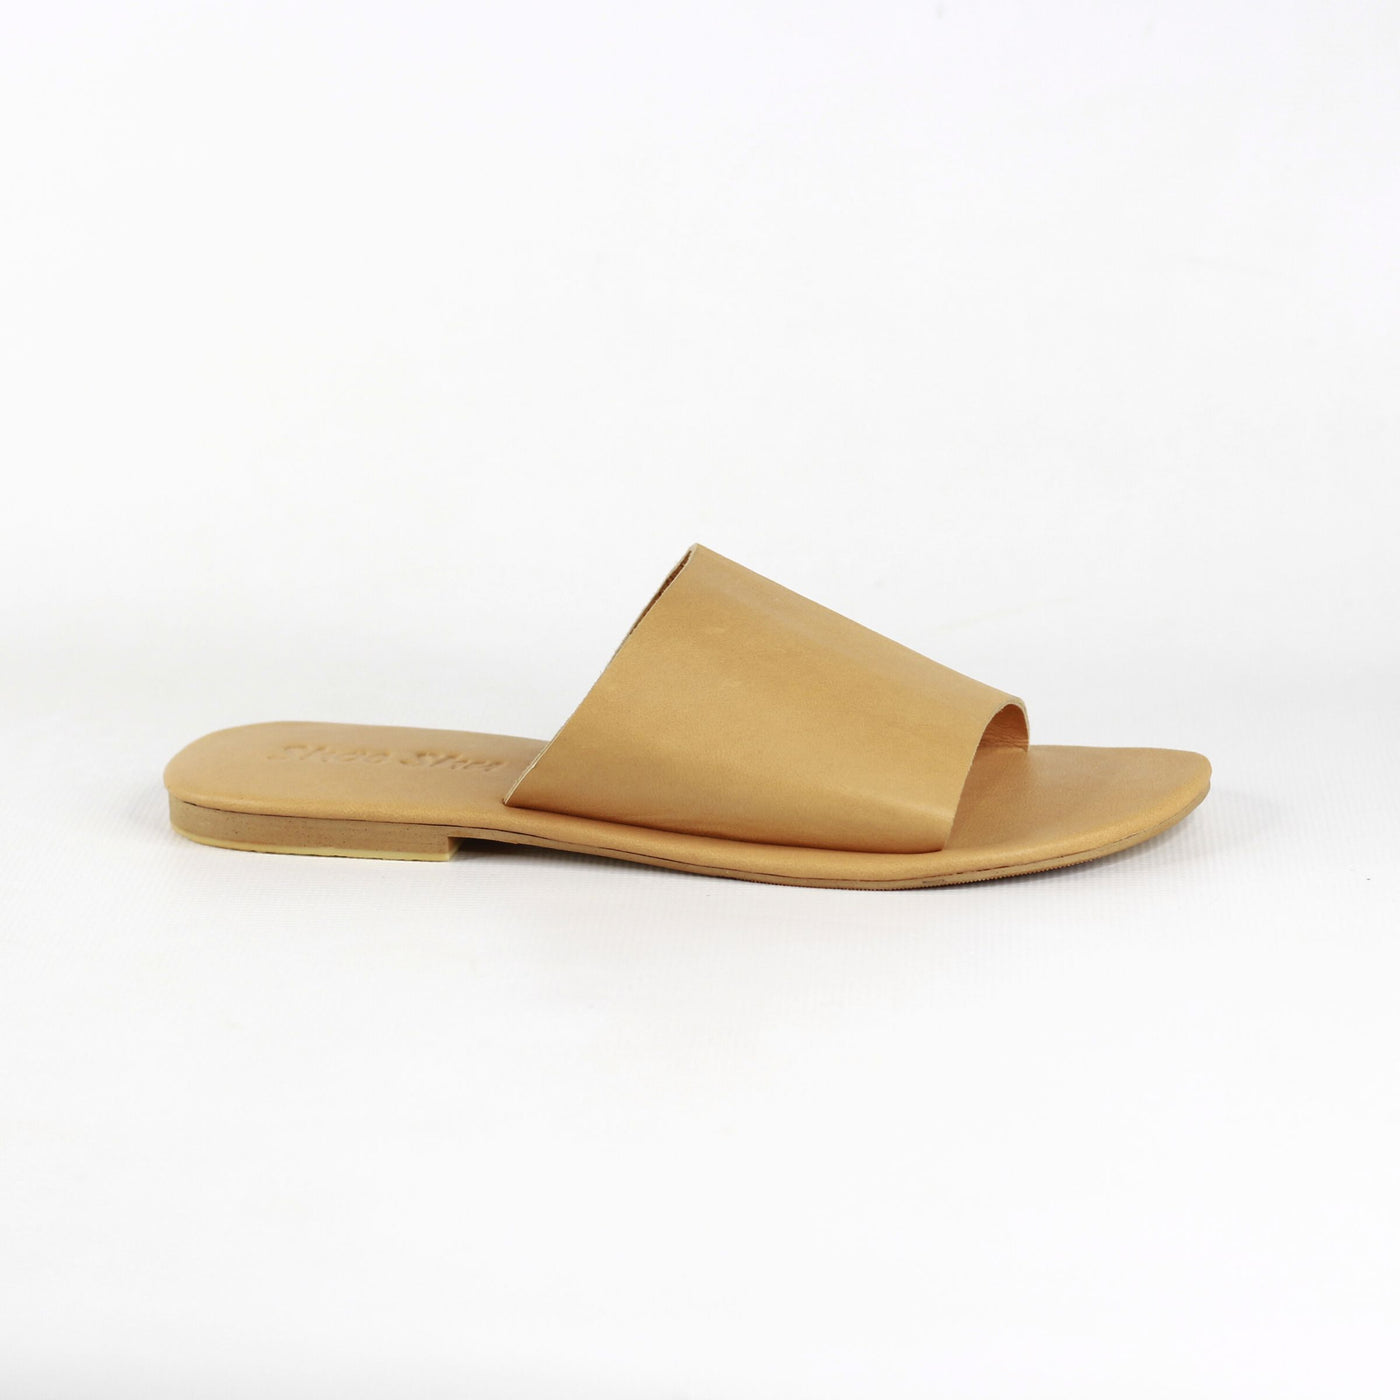 Rachel Black by ShoeShu | Womens Slides Wide Fitting by white backdrop Leather